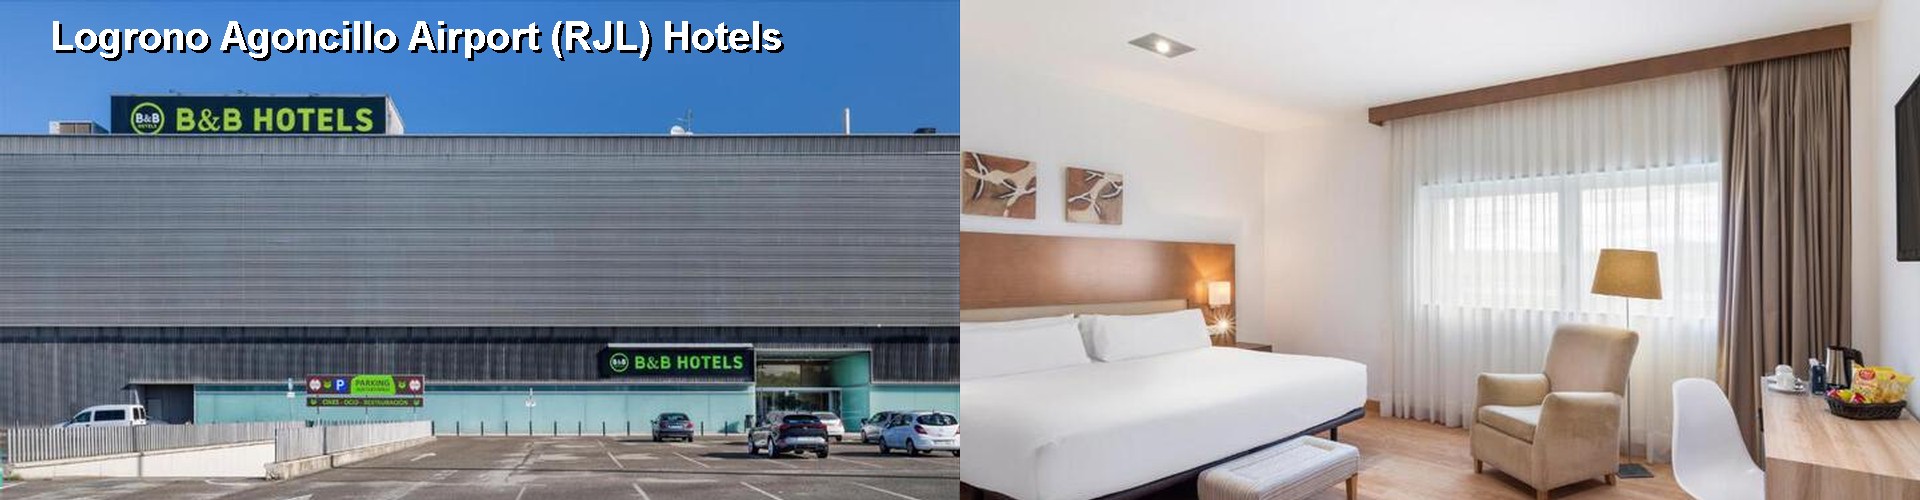 5 Best Hotels near Logrono Agoncillo Airport (RJL)